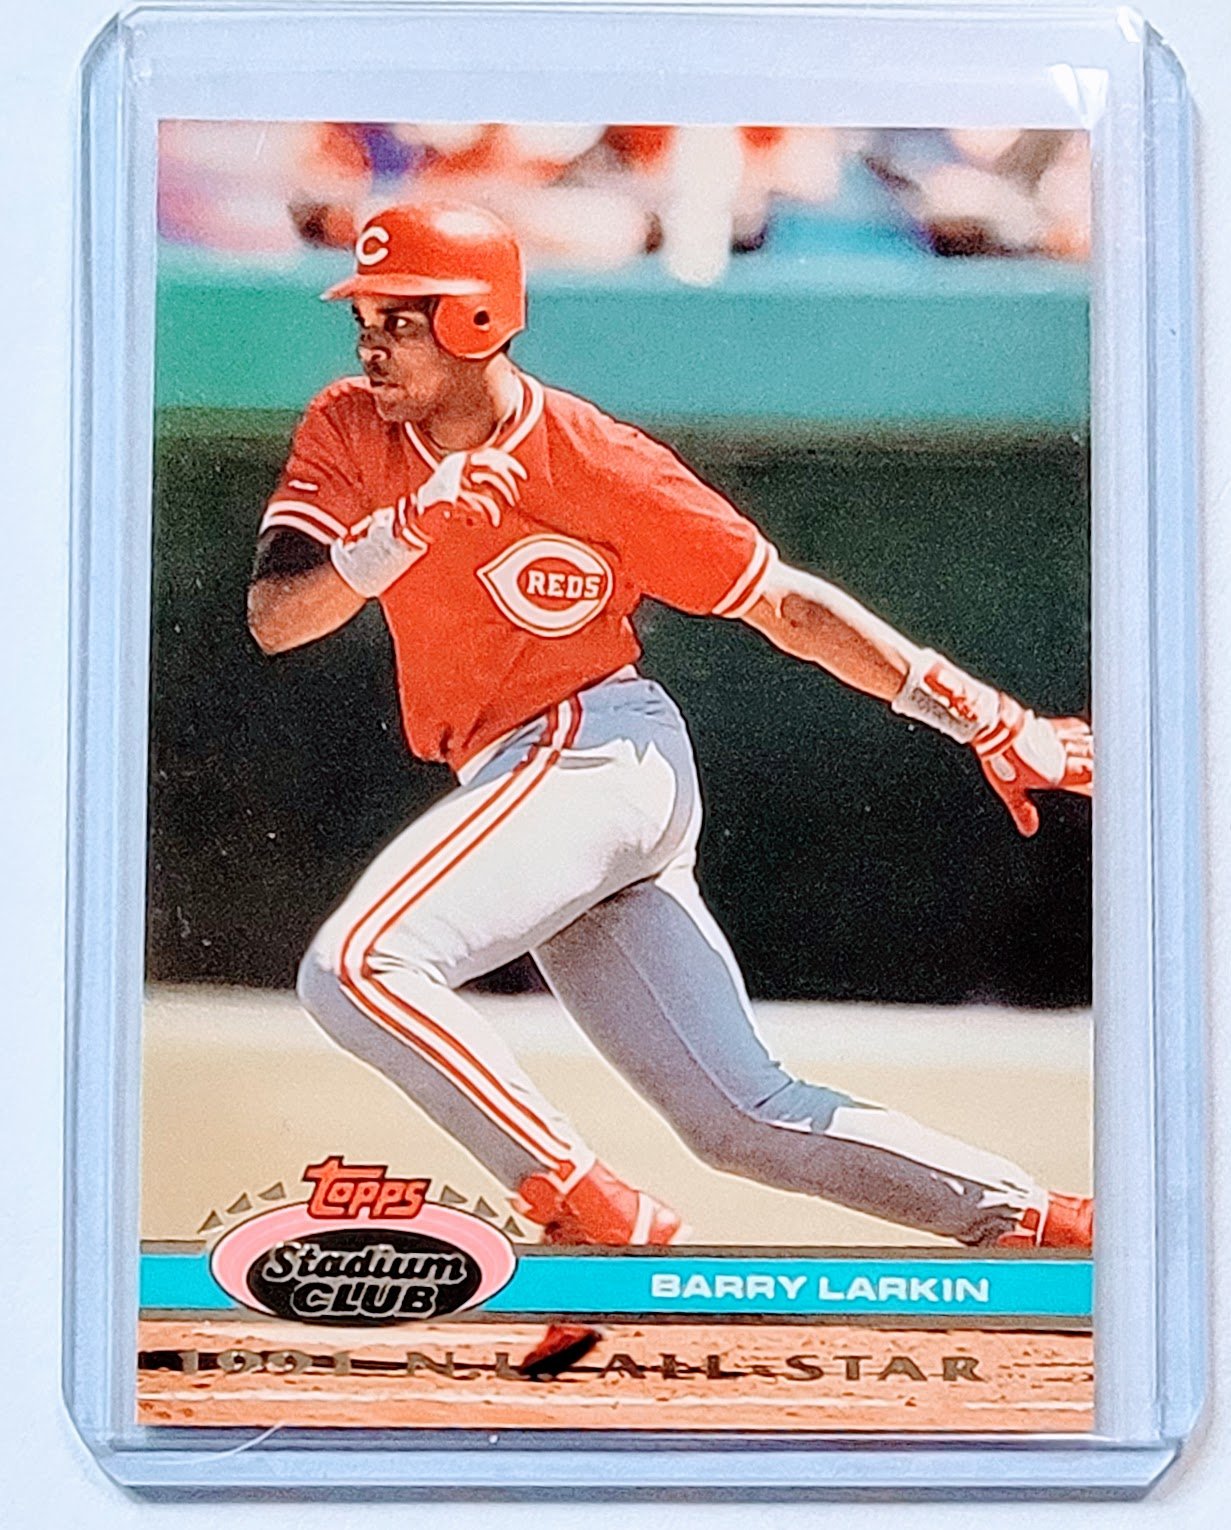 1992 Topps Stadium Club Dome Barry Larkin 1991 All Star MLB Baseball Trading Card TPTV simple Xclusive Collectibles   